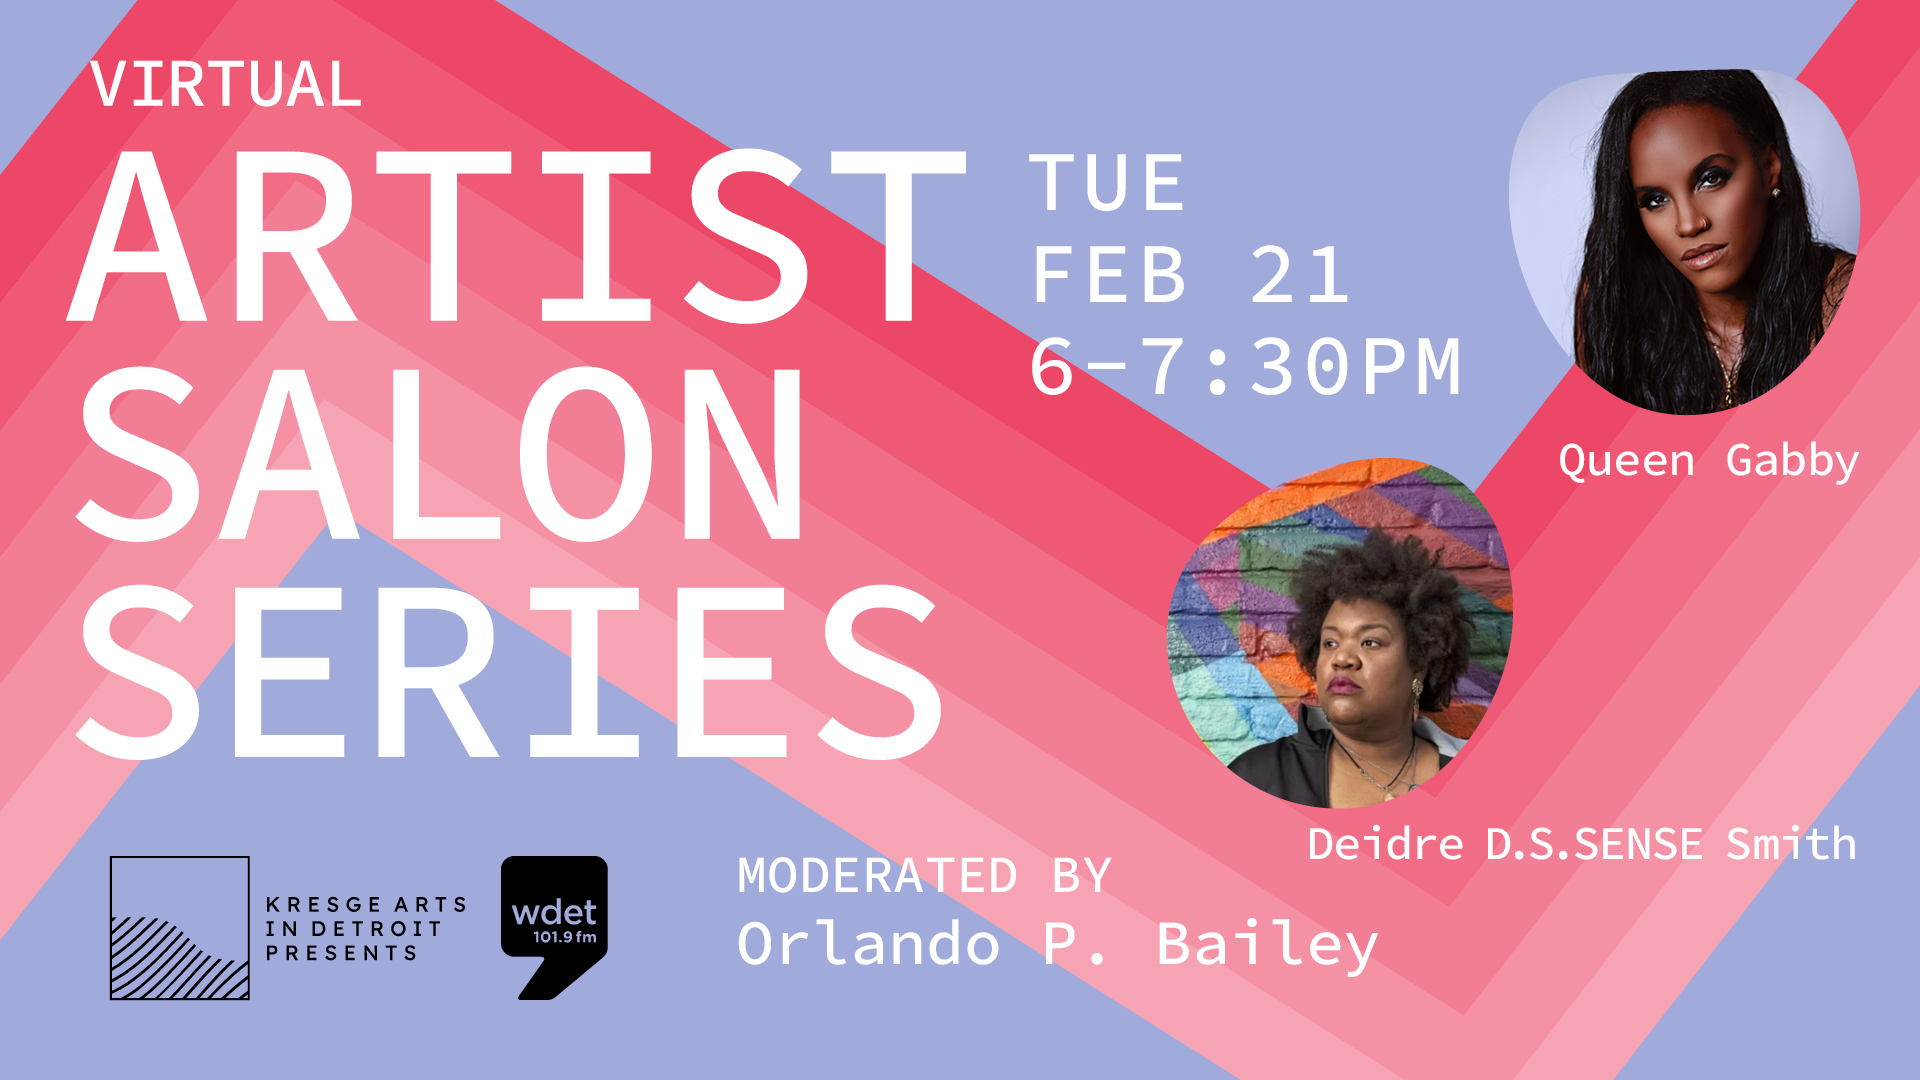 purple and pink graphic promoting Kresge's Virtual Artist Salon Series with Queen Gabby and Deidre D.S.SENSE Smith